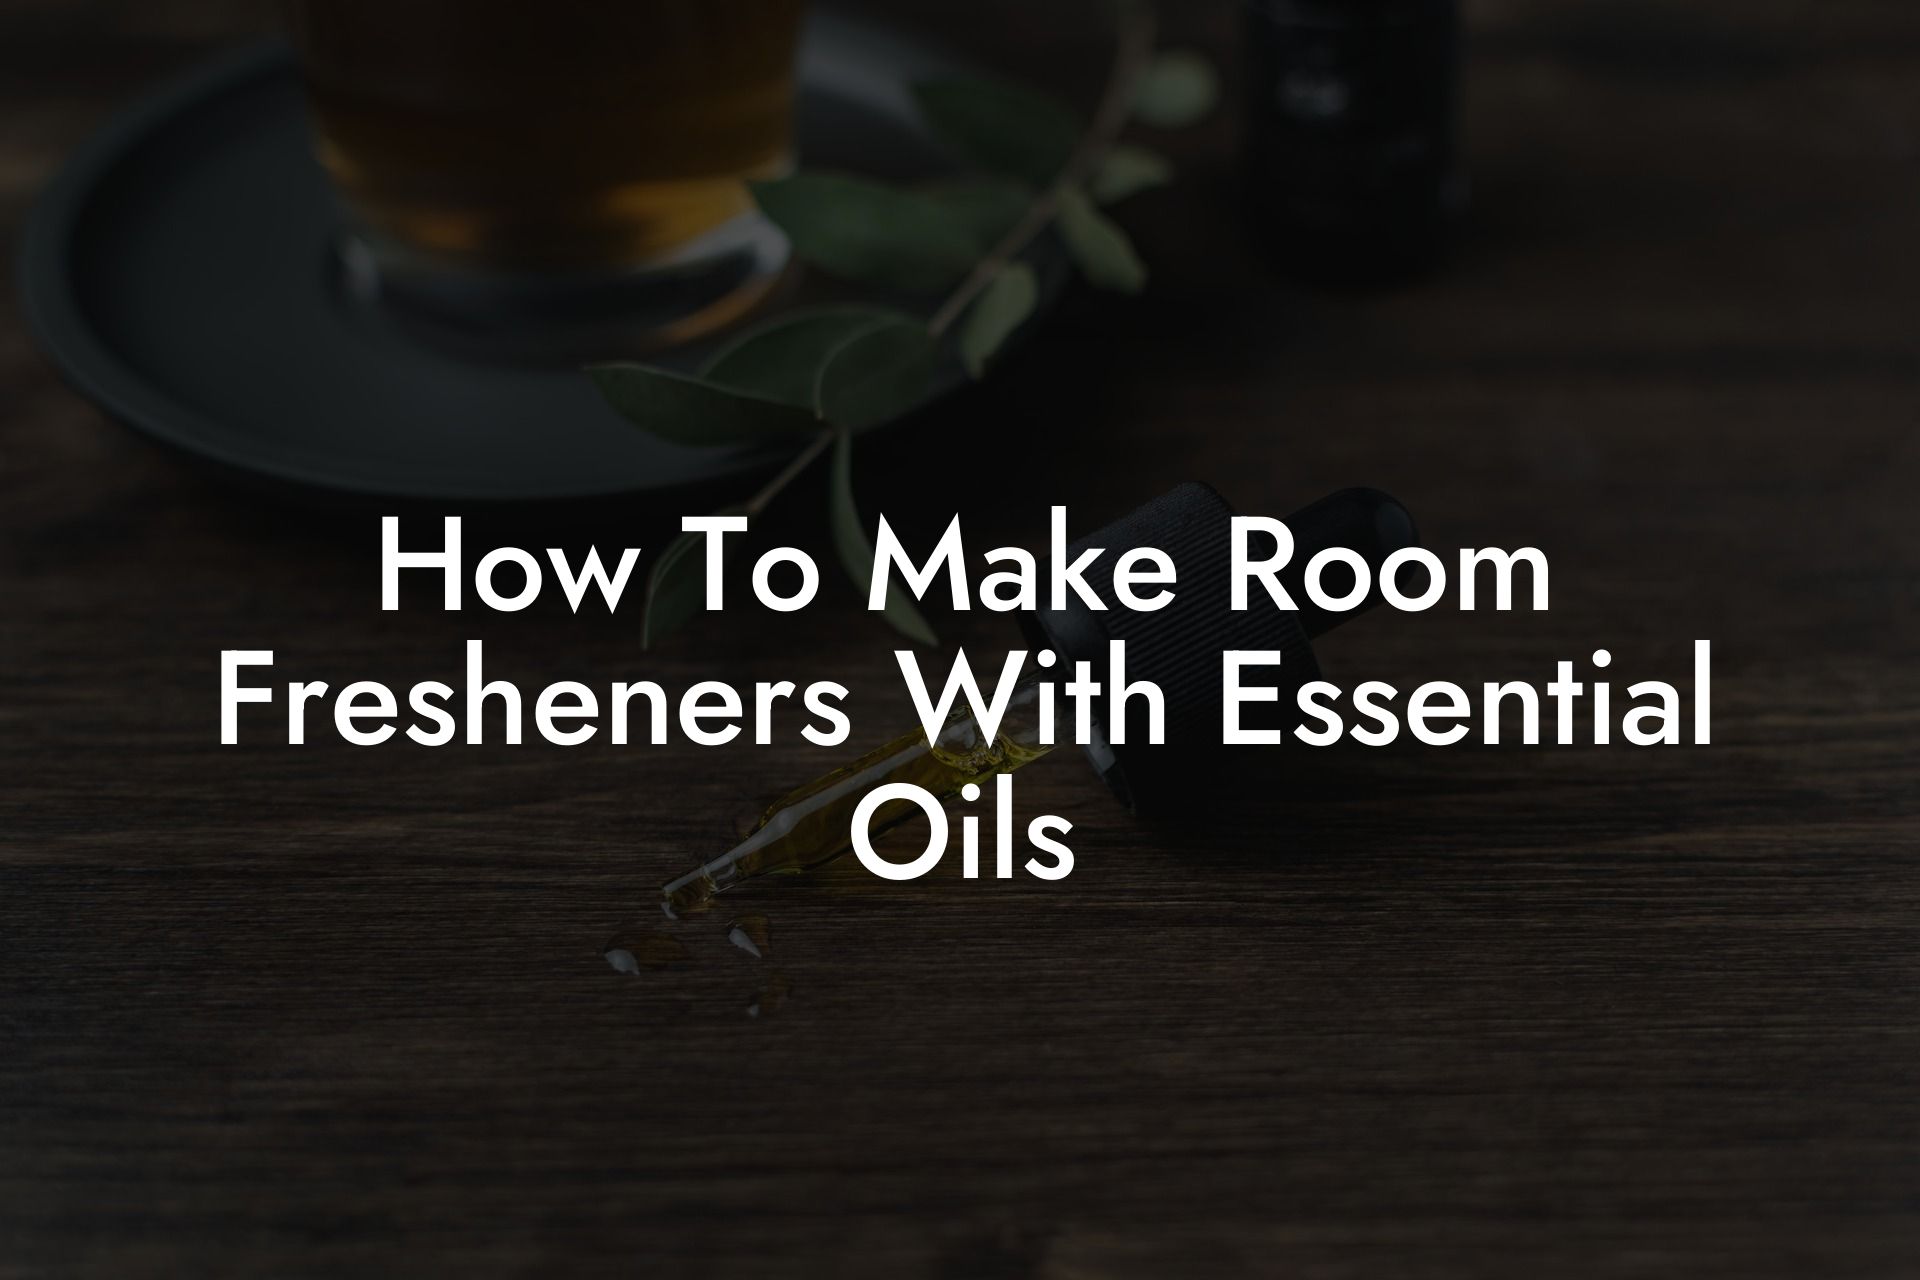 How To Make Room Fresheners With Essential Oils